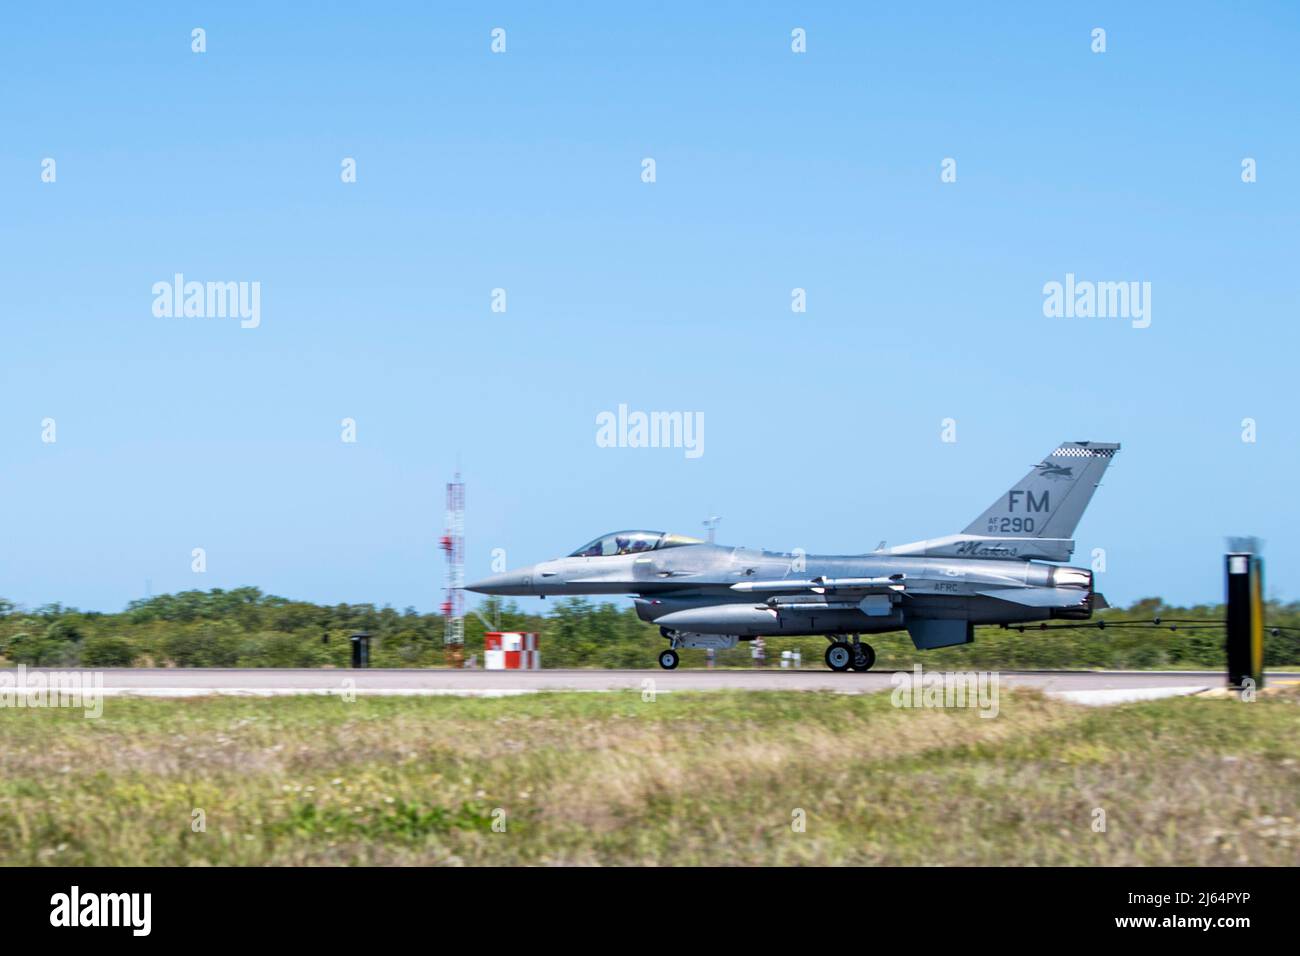 An F-16C Fighting Falcon aircraft assigned to the 482nd Fighter Wing, Homestead Air Reserve Base, Florida, tests a Bak-12 aircraft arresting system at MacDill Air Force Base, Florida, April 22, 2022. The Bak-12 system is used to support fighter aircraft in the event of an in-flight emergency by preventing the aircraft from overrunning on the flightline. (U.S. Air Force photo by Airman 1st Class Hiram Martinez) Stock Photo